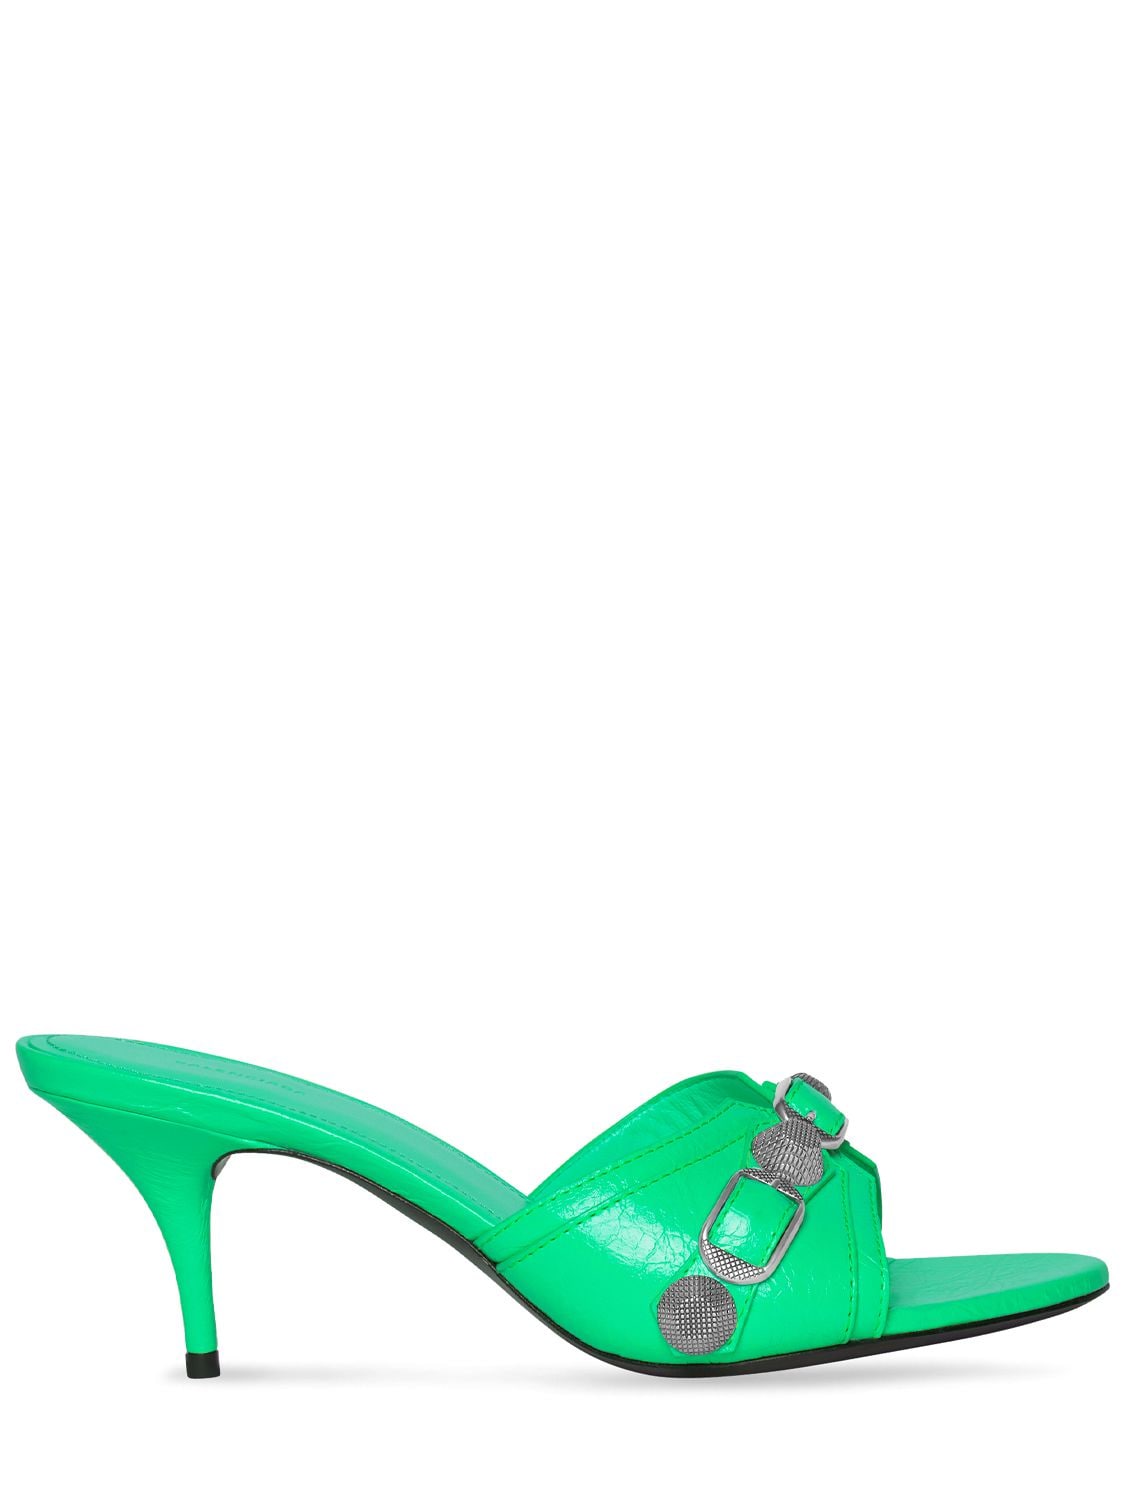 Balenciaga Cagole Studded Leather Mules In Green | ModeSens